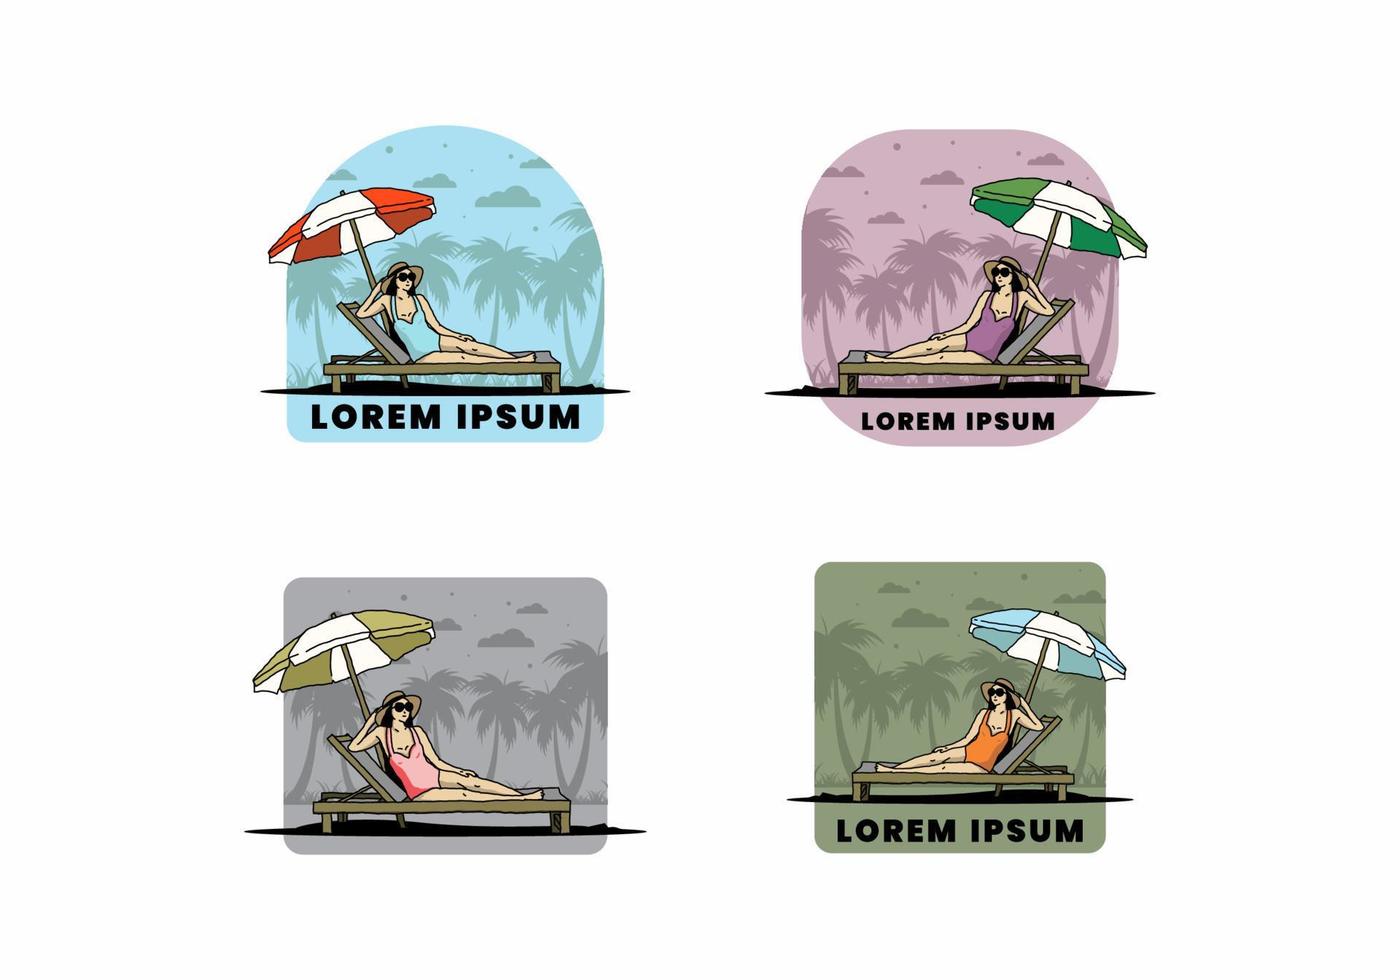 Relax on the beach chair under the umbrella illustration vector